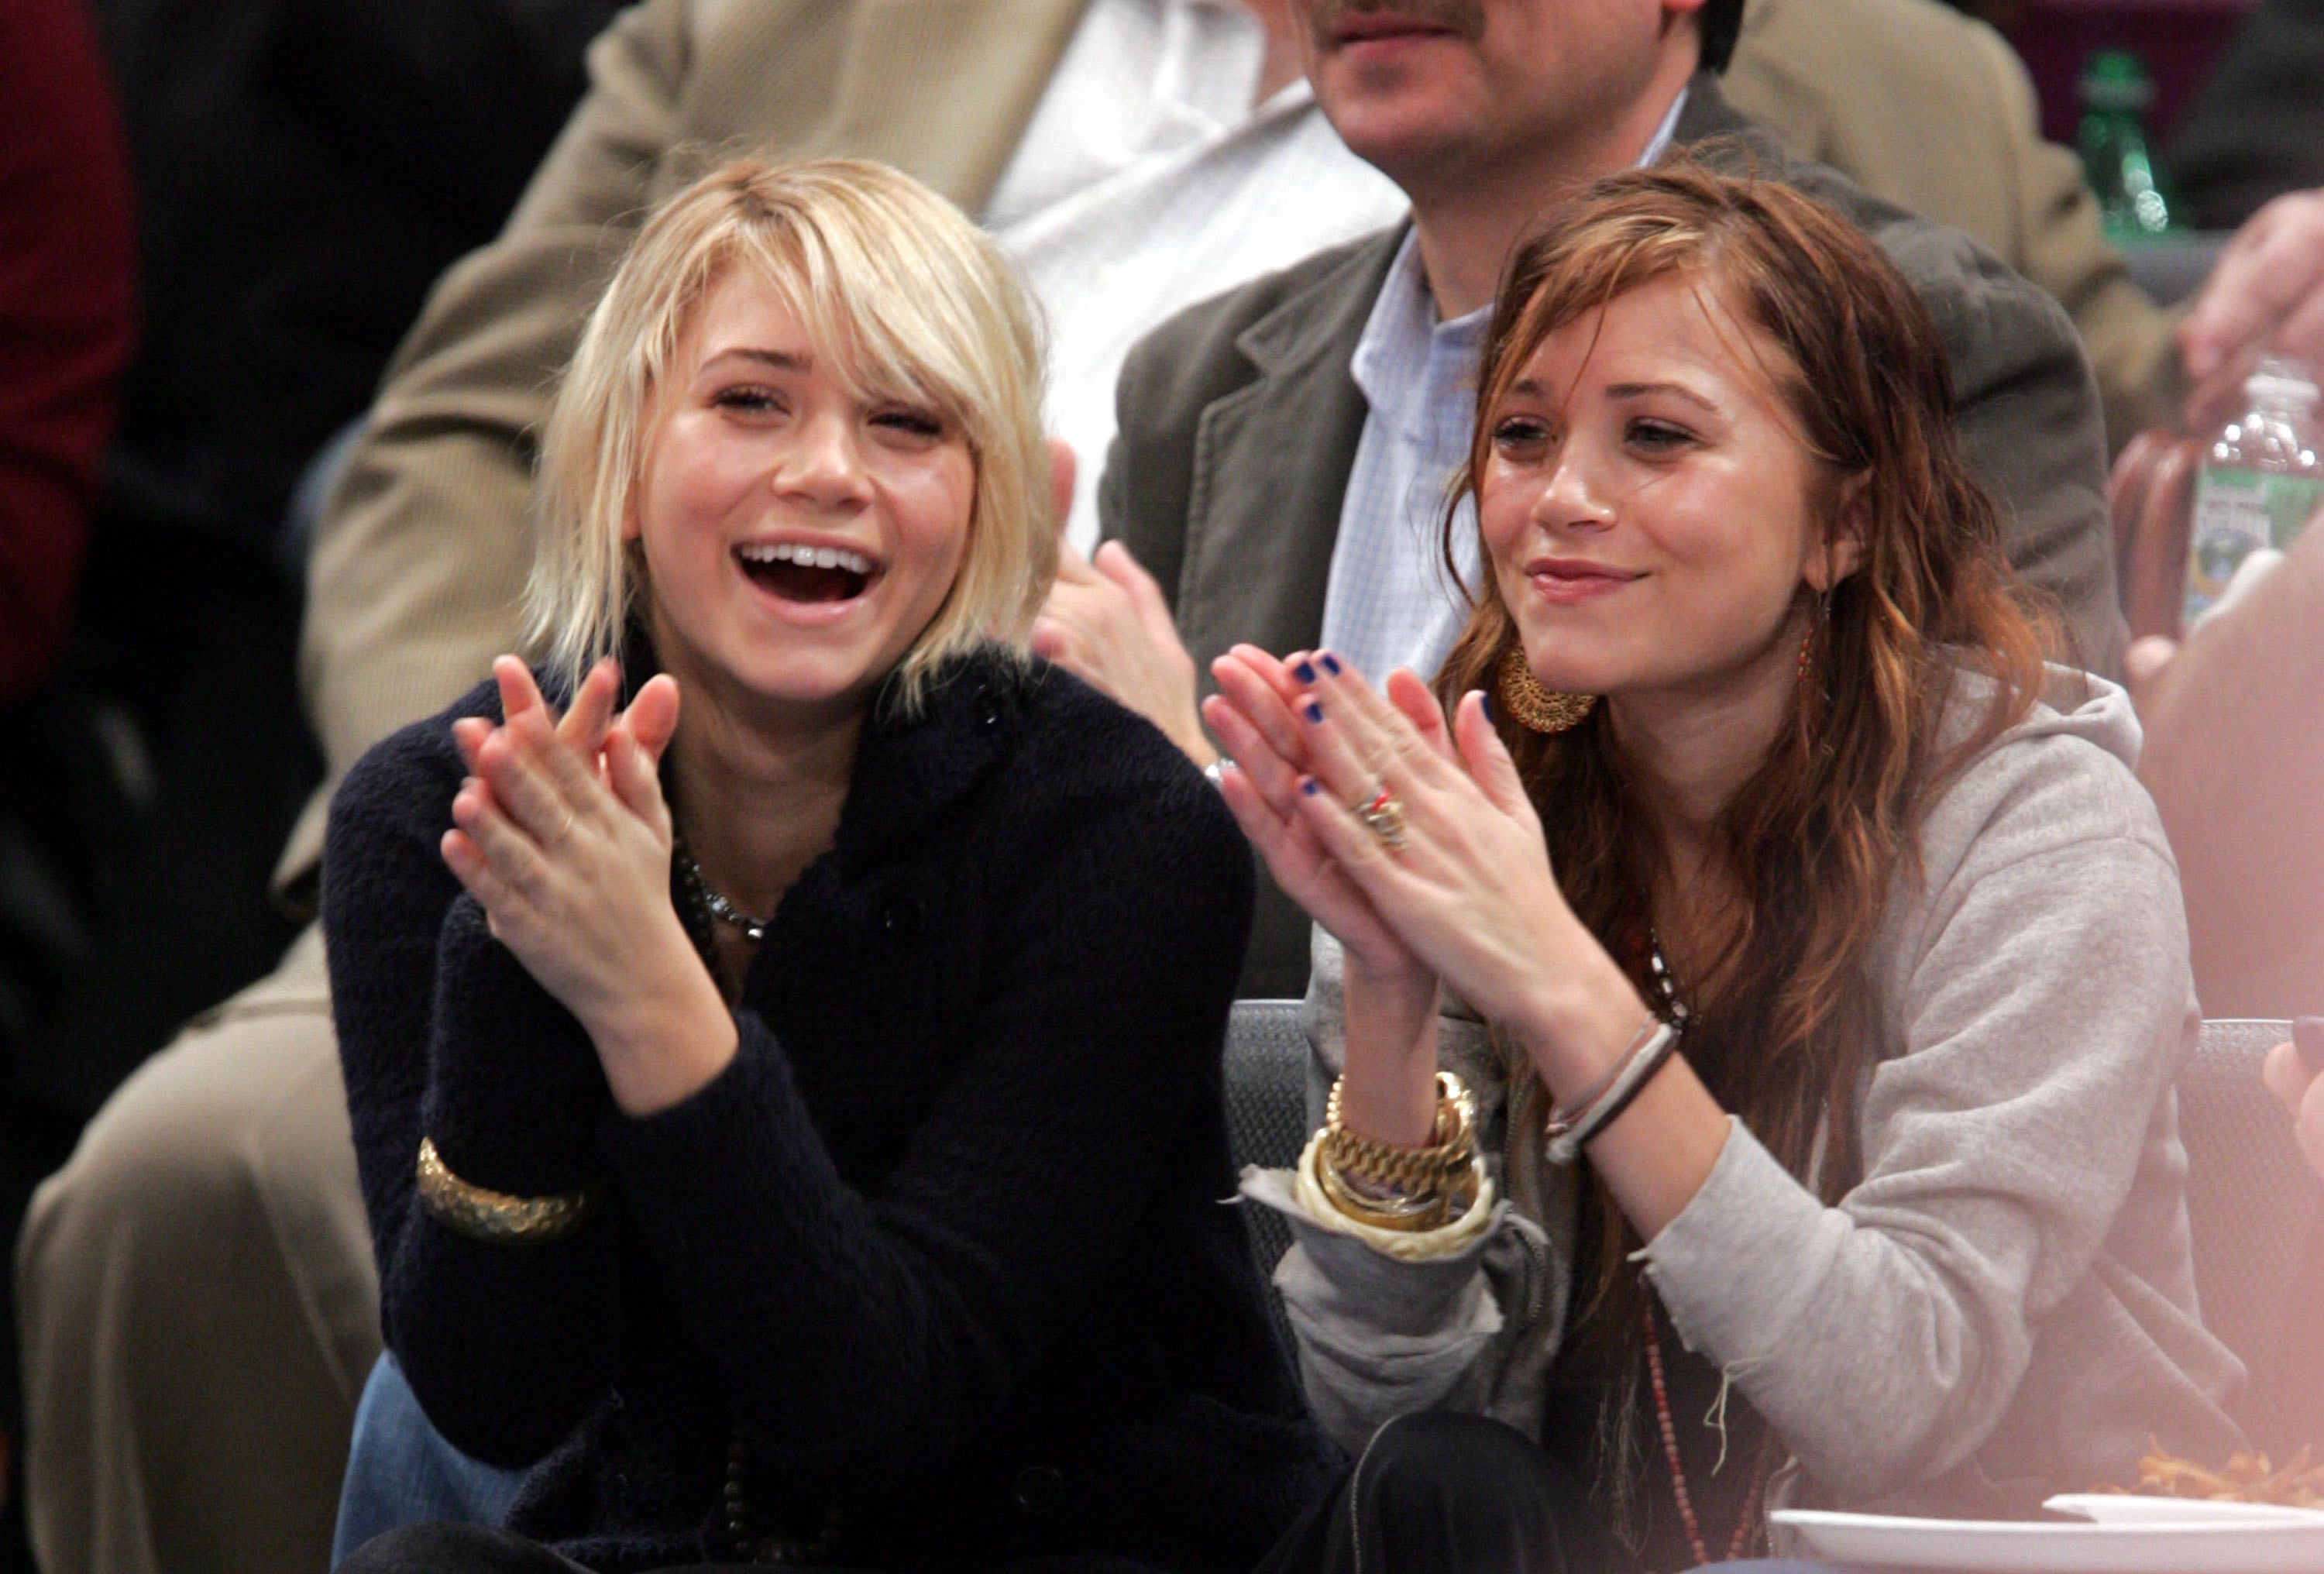 Mary-Kate and Ashley Olsen at a New York Knicks Game